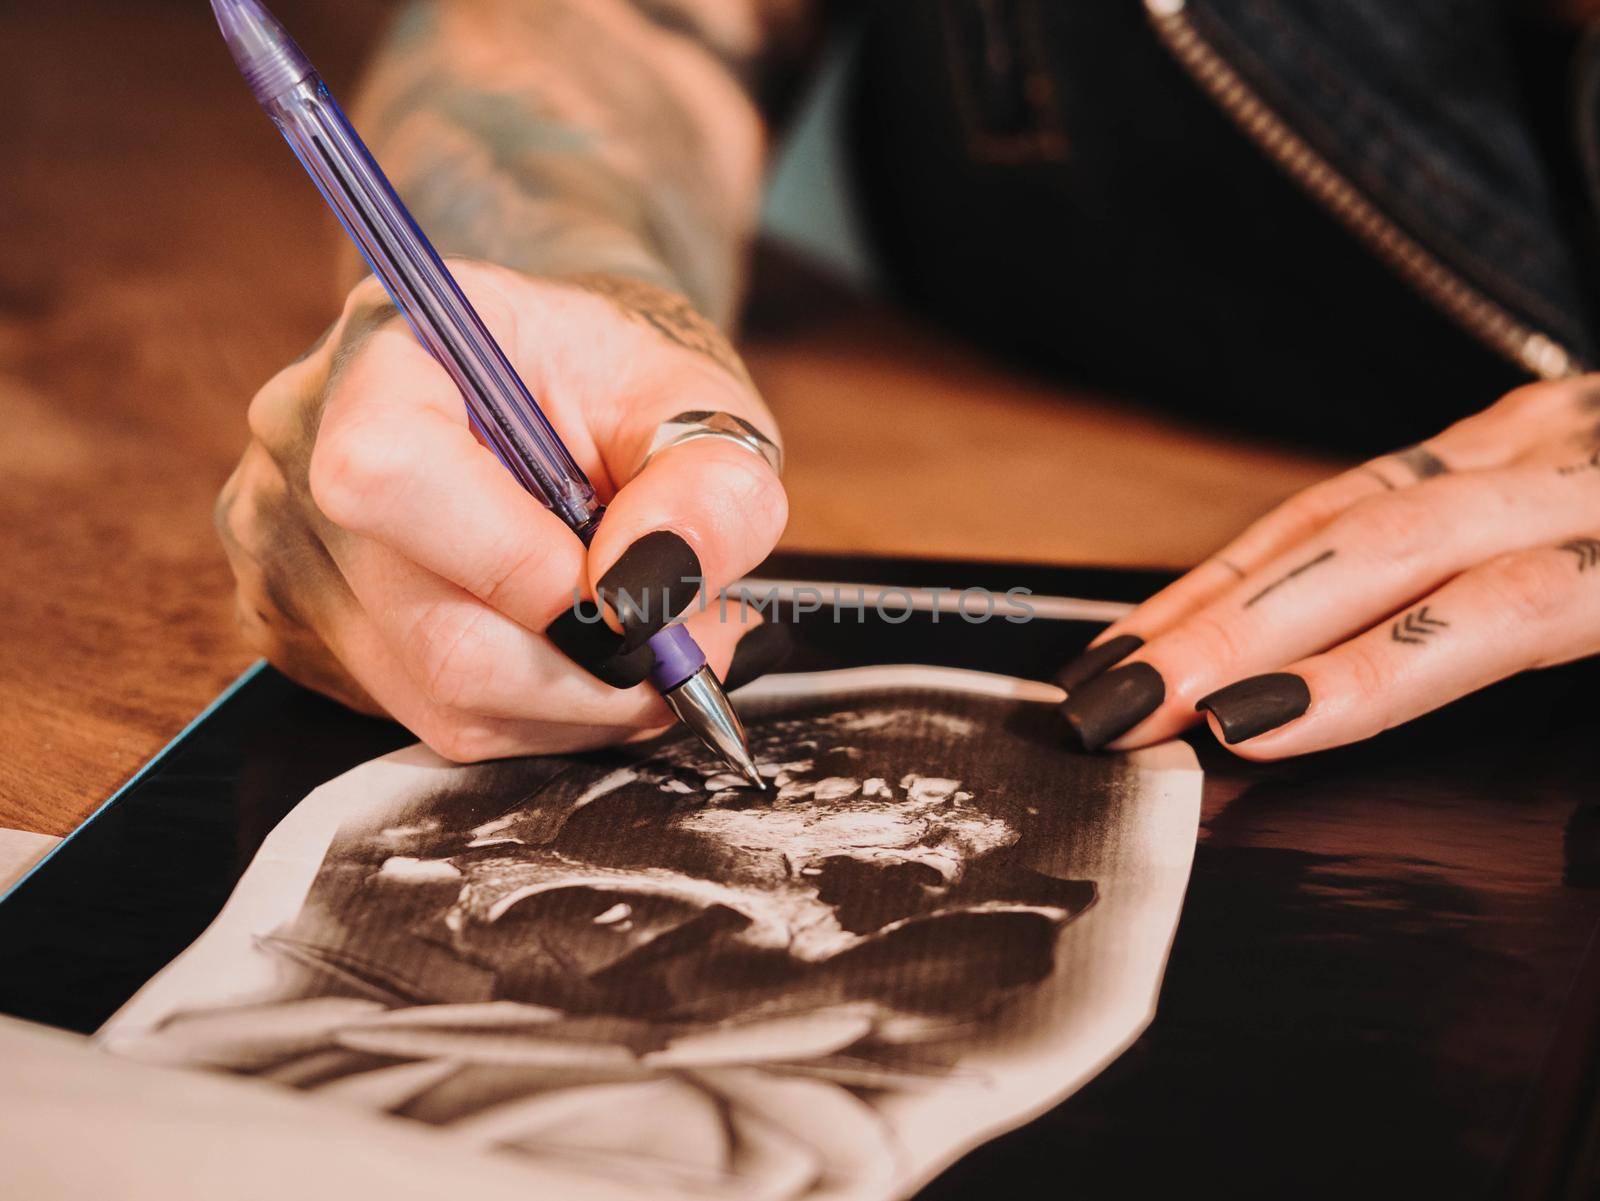 Tattoo artist drawing illustration of skull inside ink studio. Woman with black nails and rings at work. New fashion lifestyle artistic trends concept . Warm cinematic filter. by kristina_kokhanova